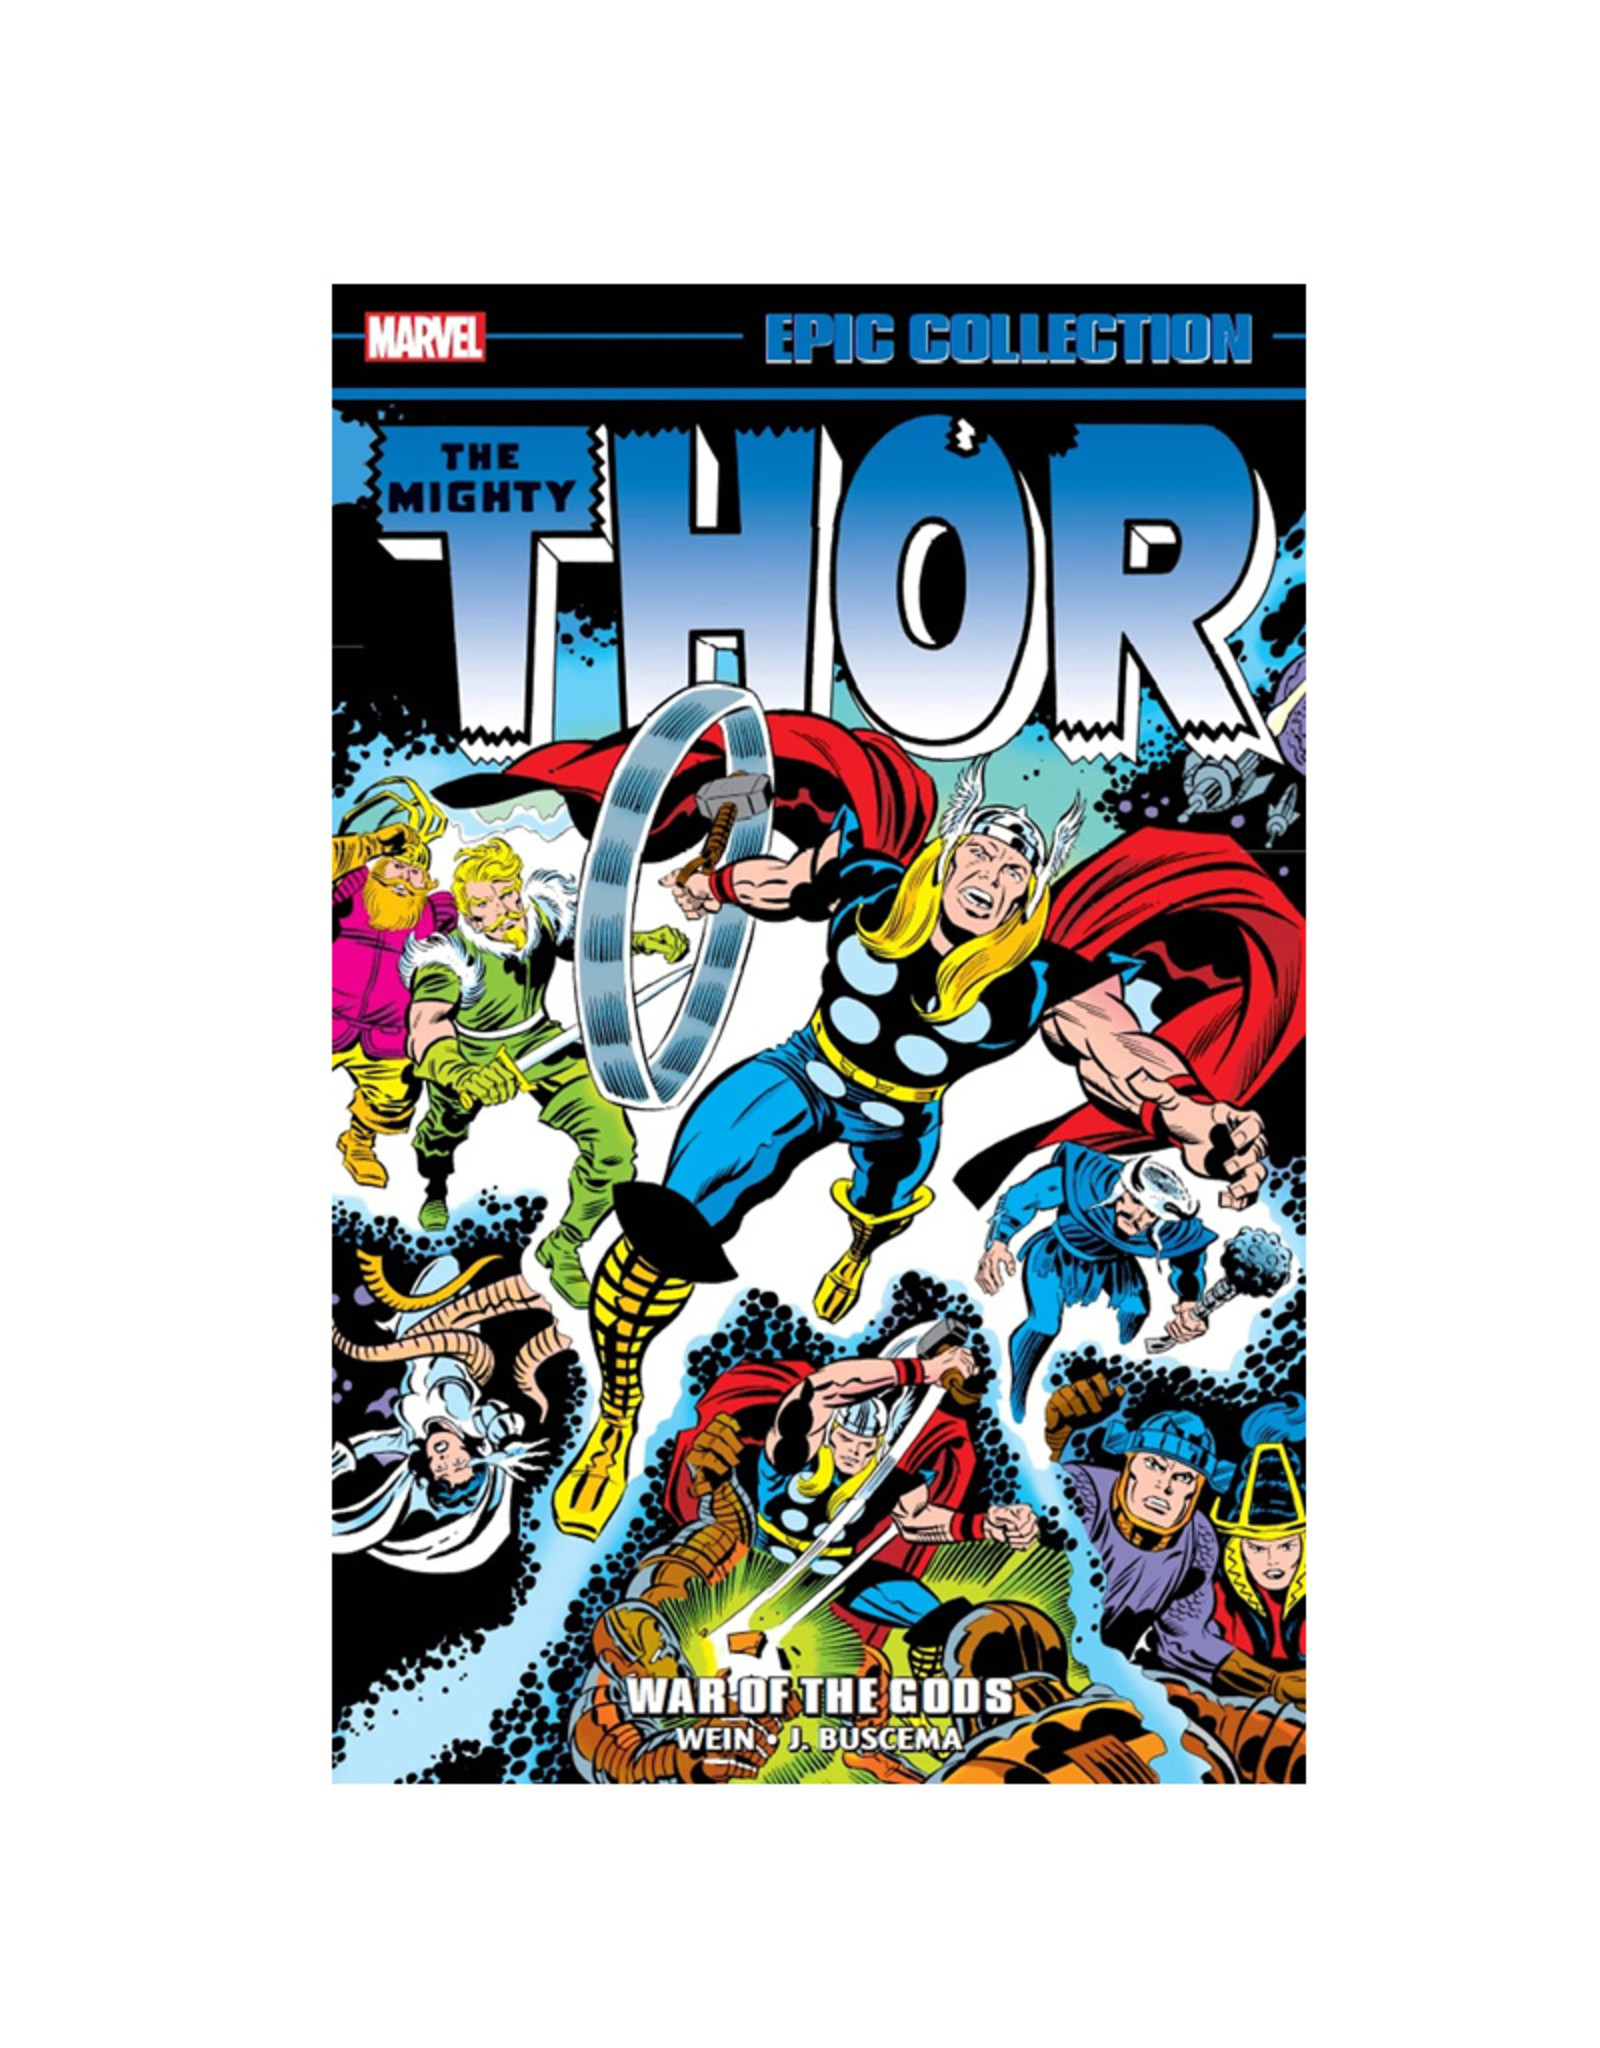 Marvel Comics Epic Collection: Thor War of the Gods TP Volume 08